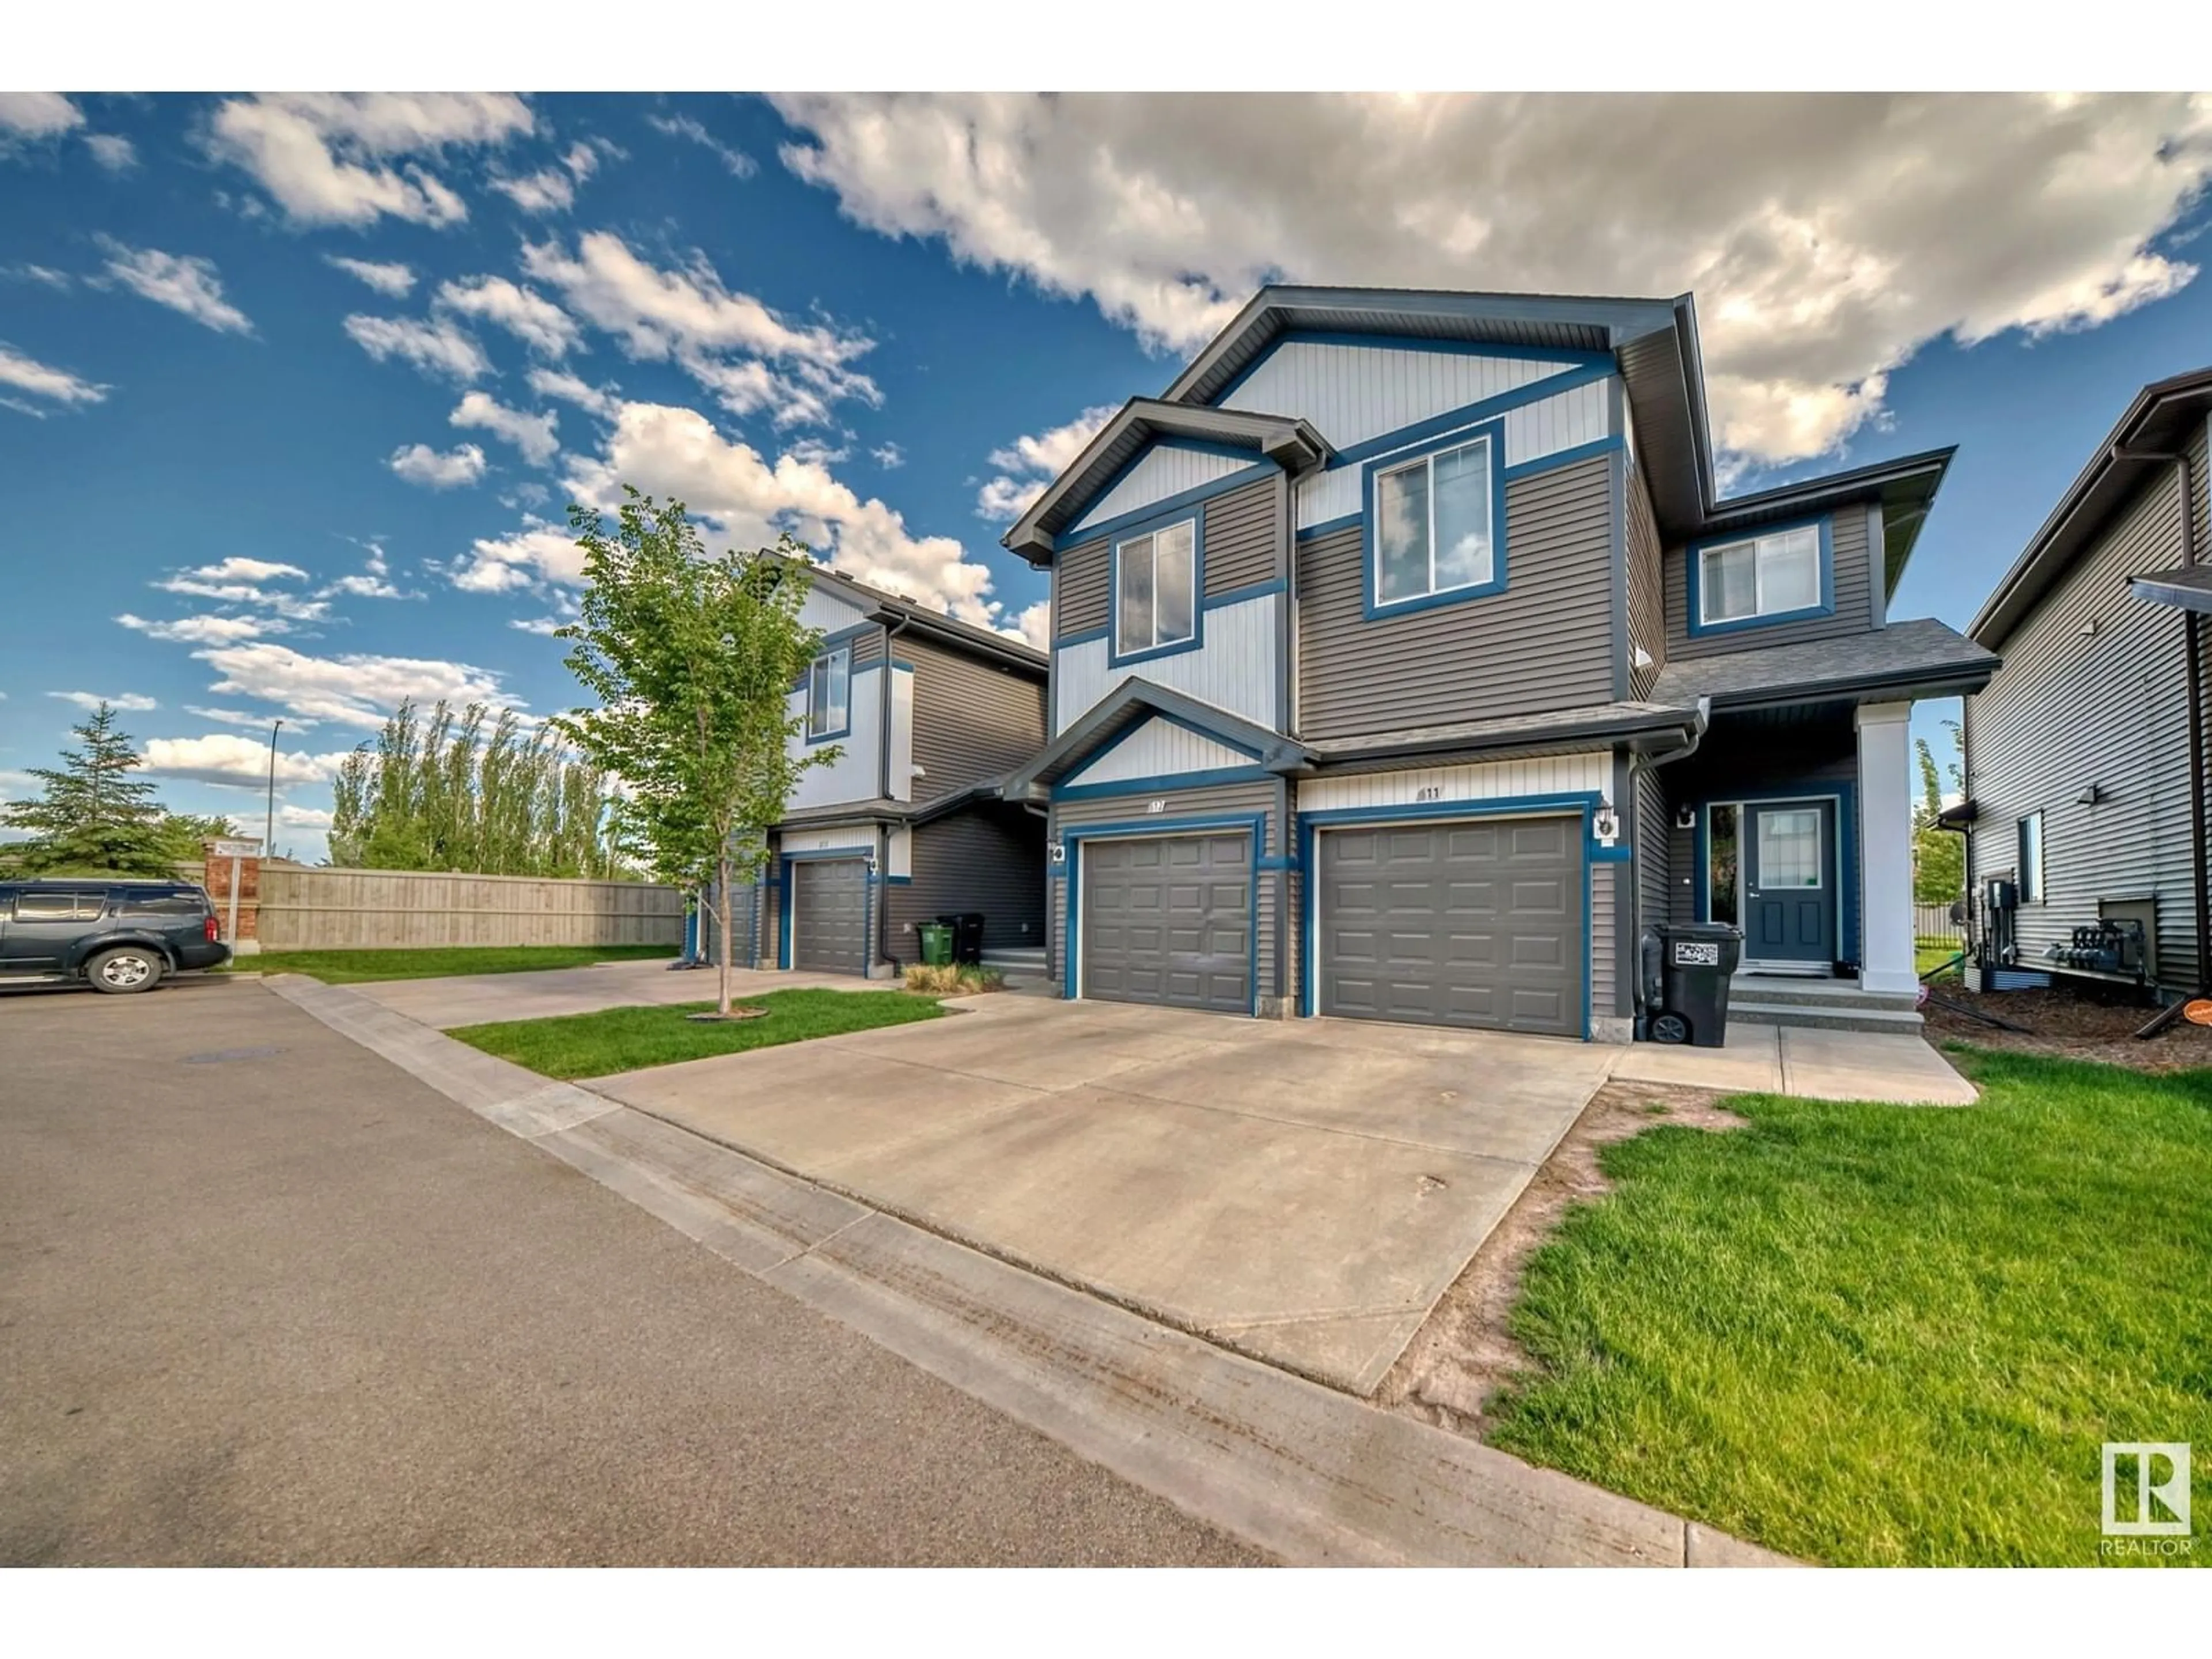 A pic from exterior of the house or condo for #12 8209 217 ST NW, Edmonton Alberta T5T6Z4